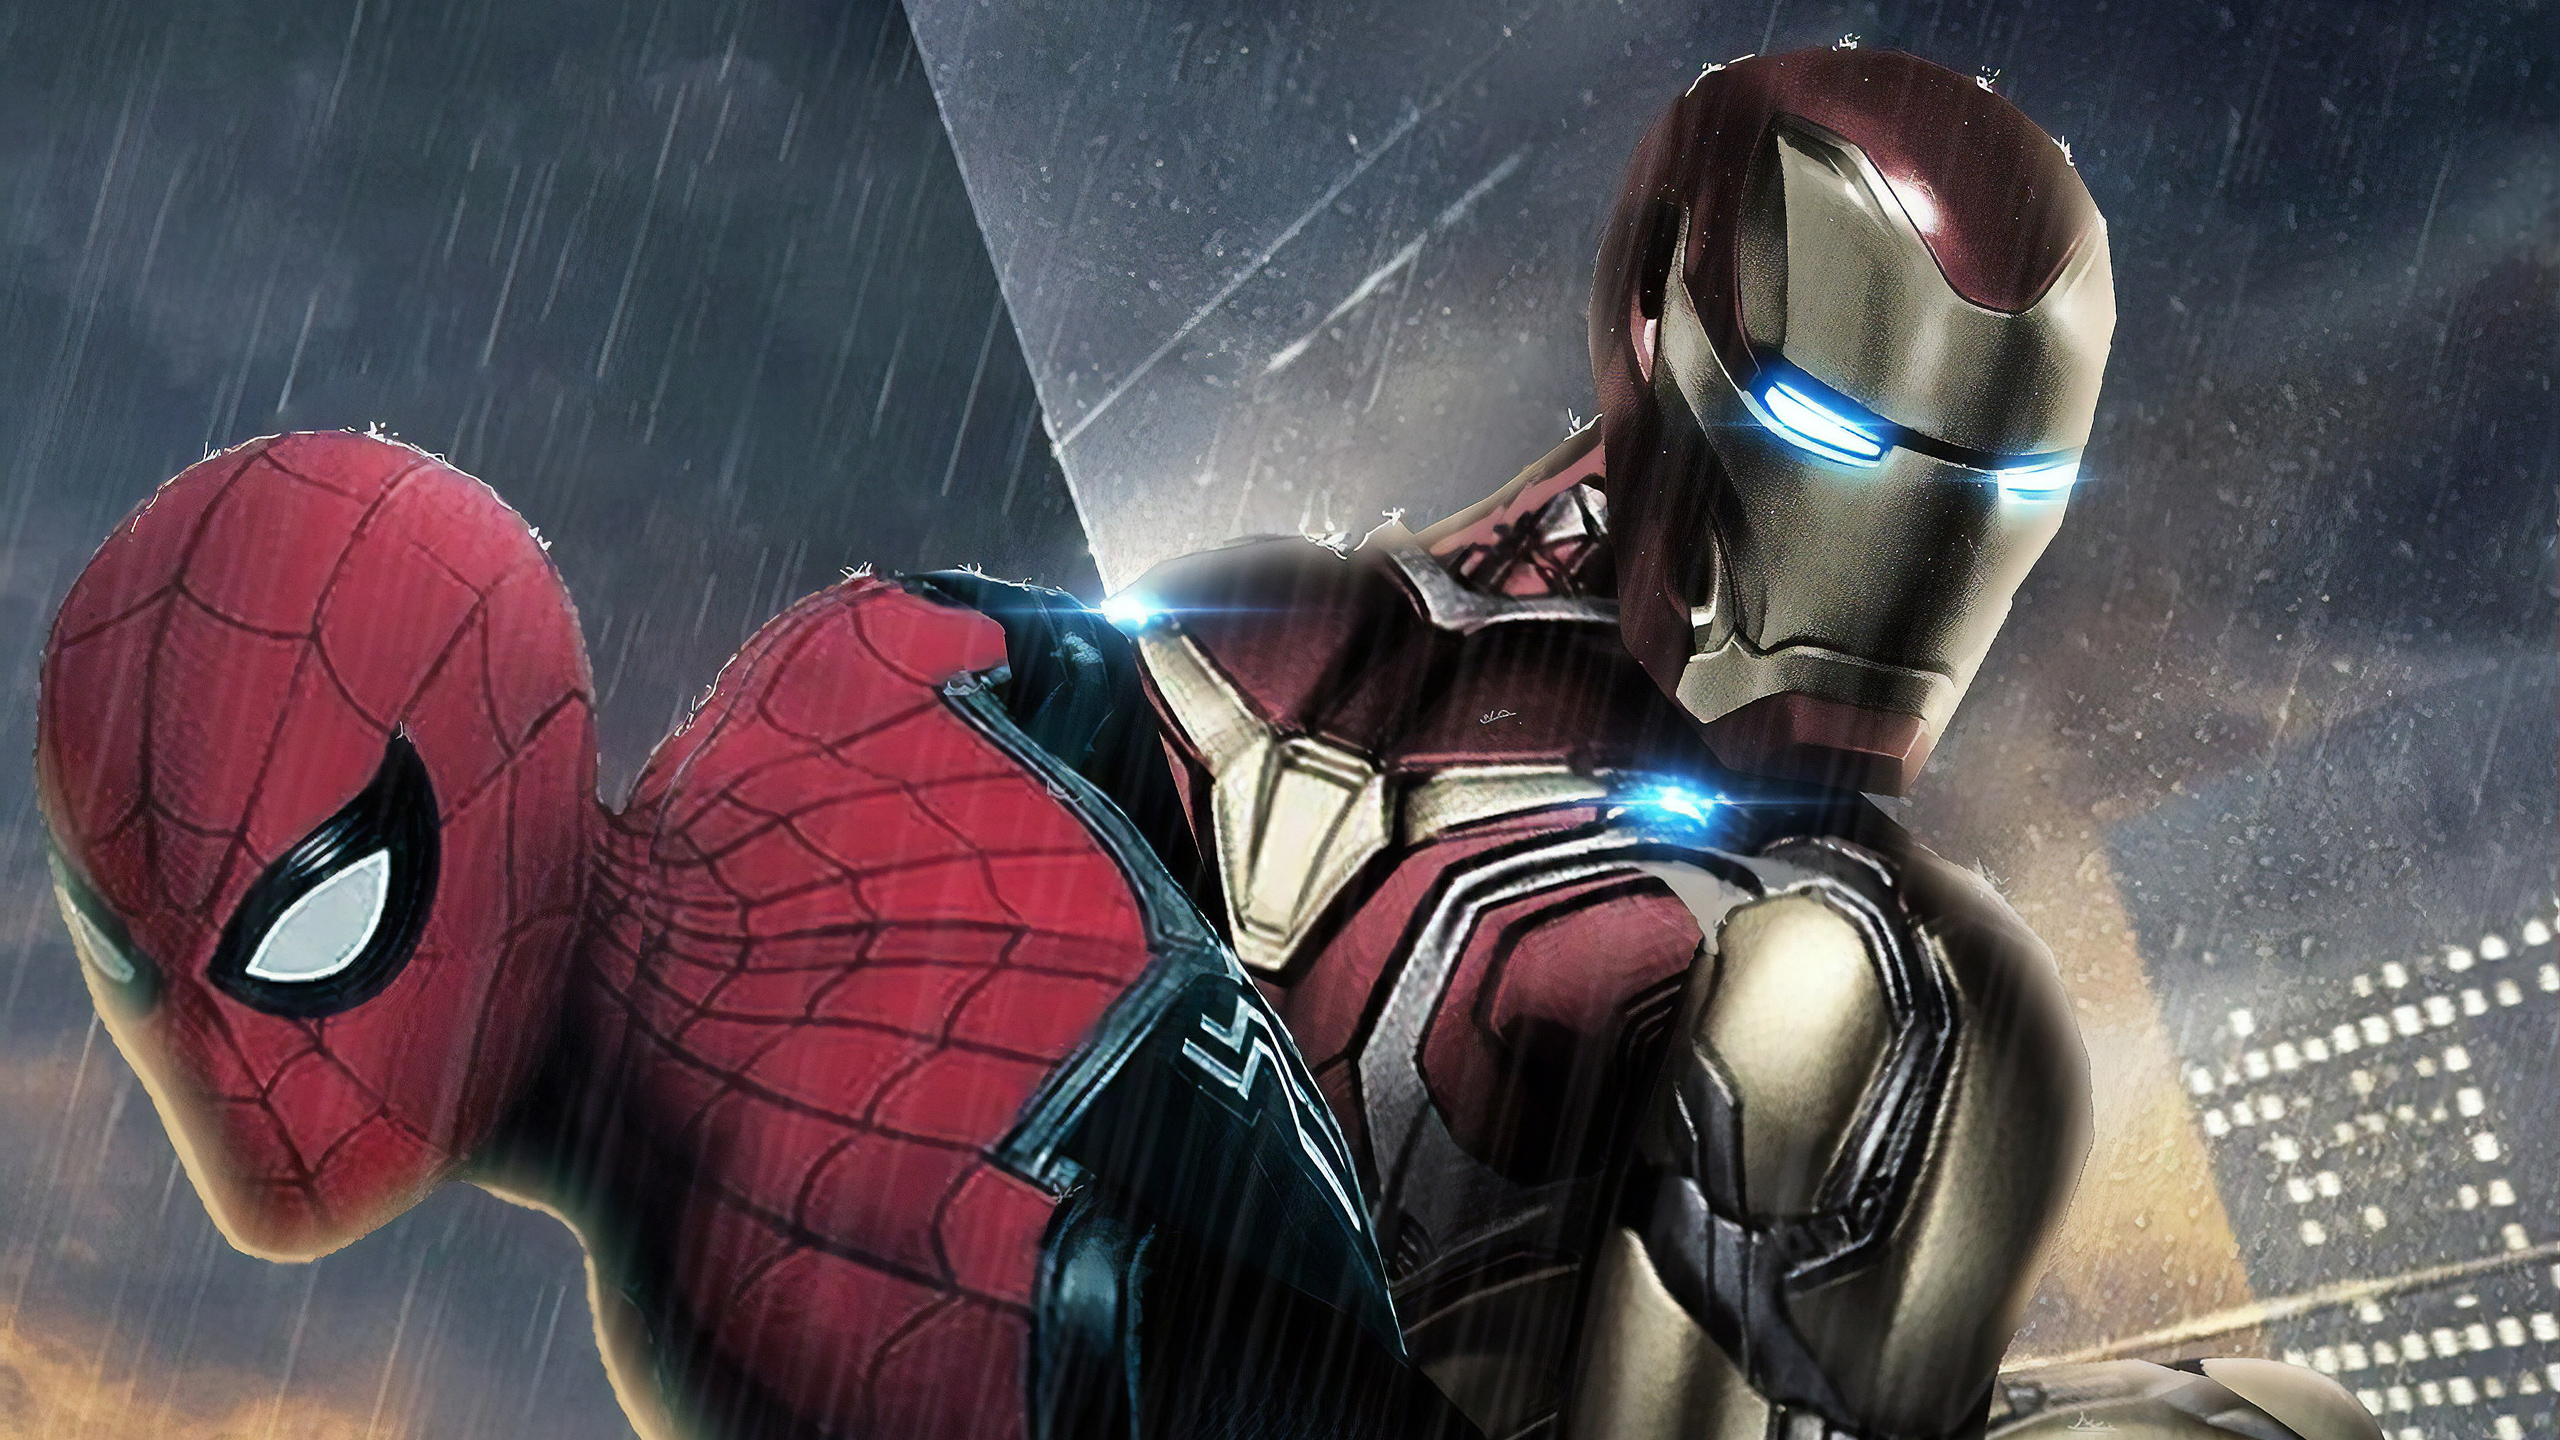  Iron  Man  And Spiderman  HD  Superheroes 4k Wallpapers  